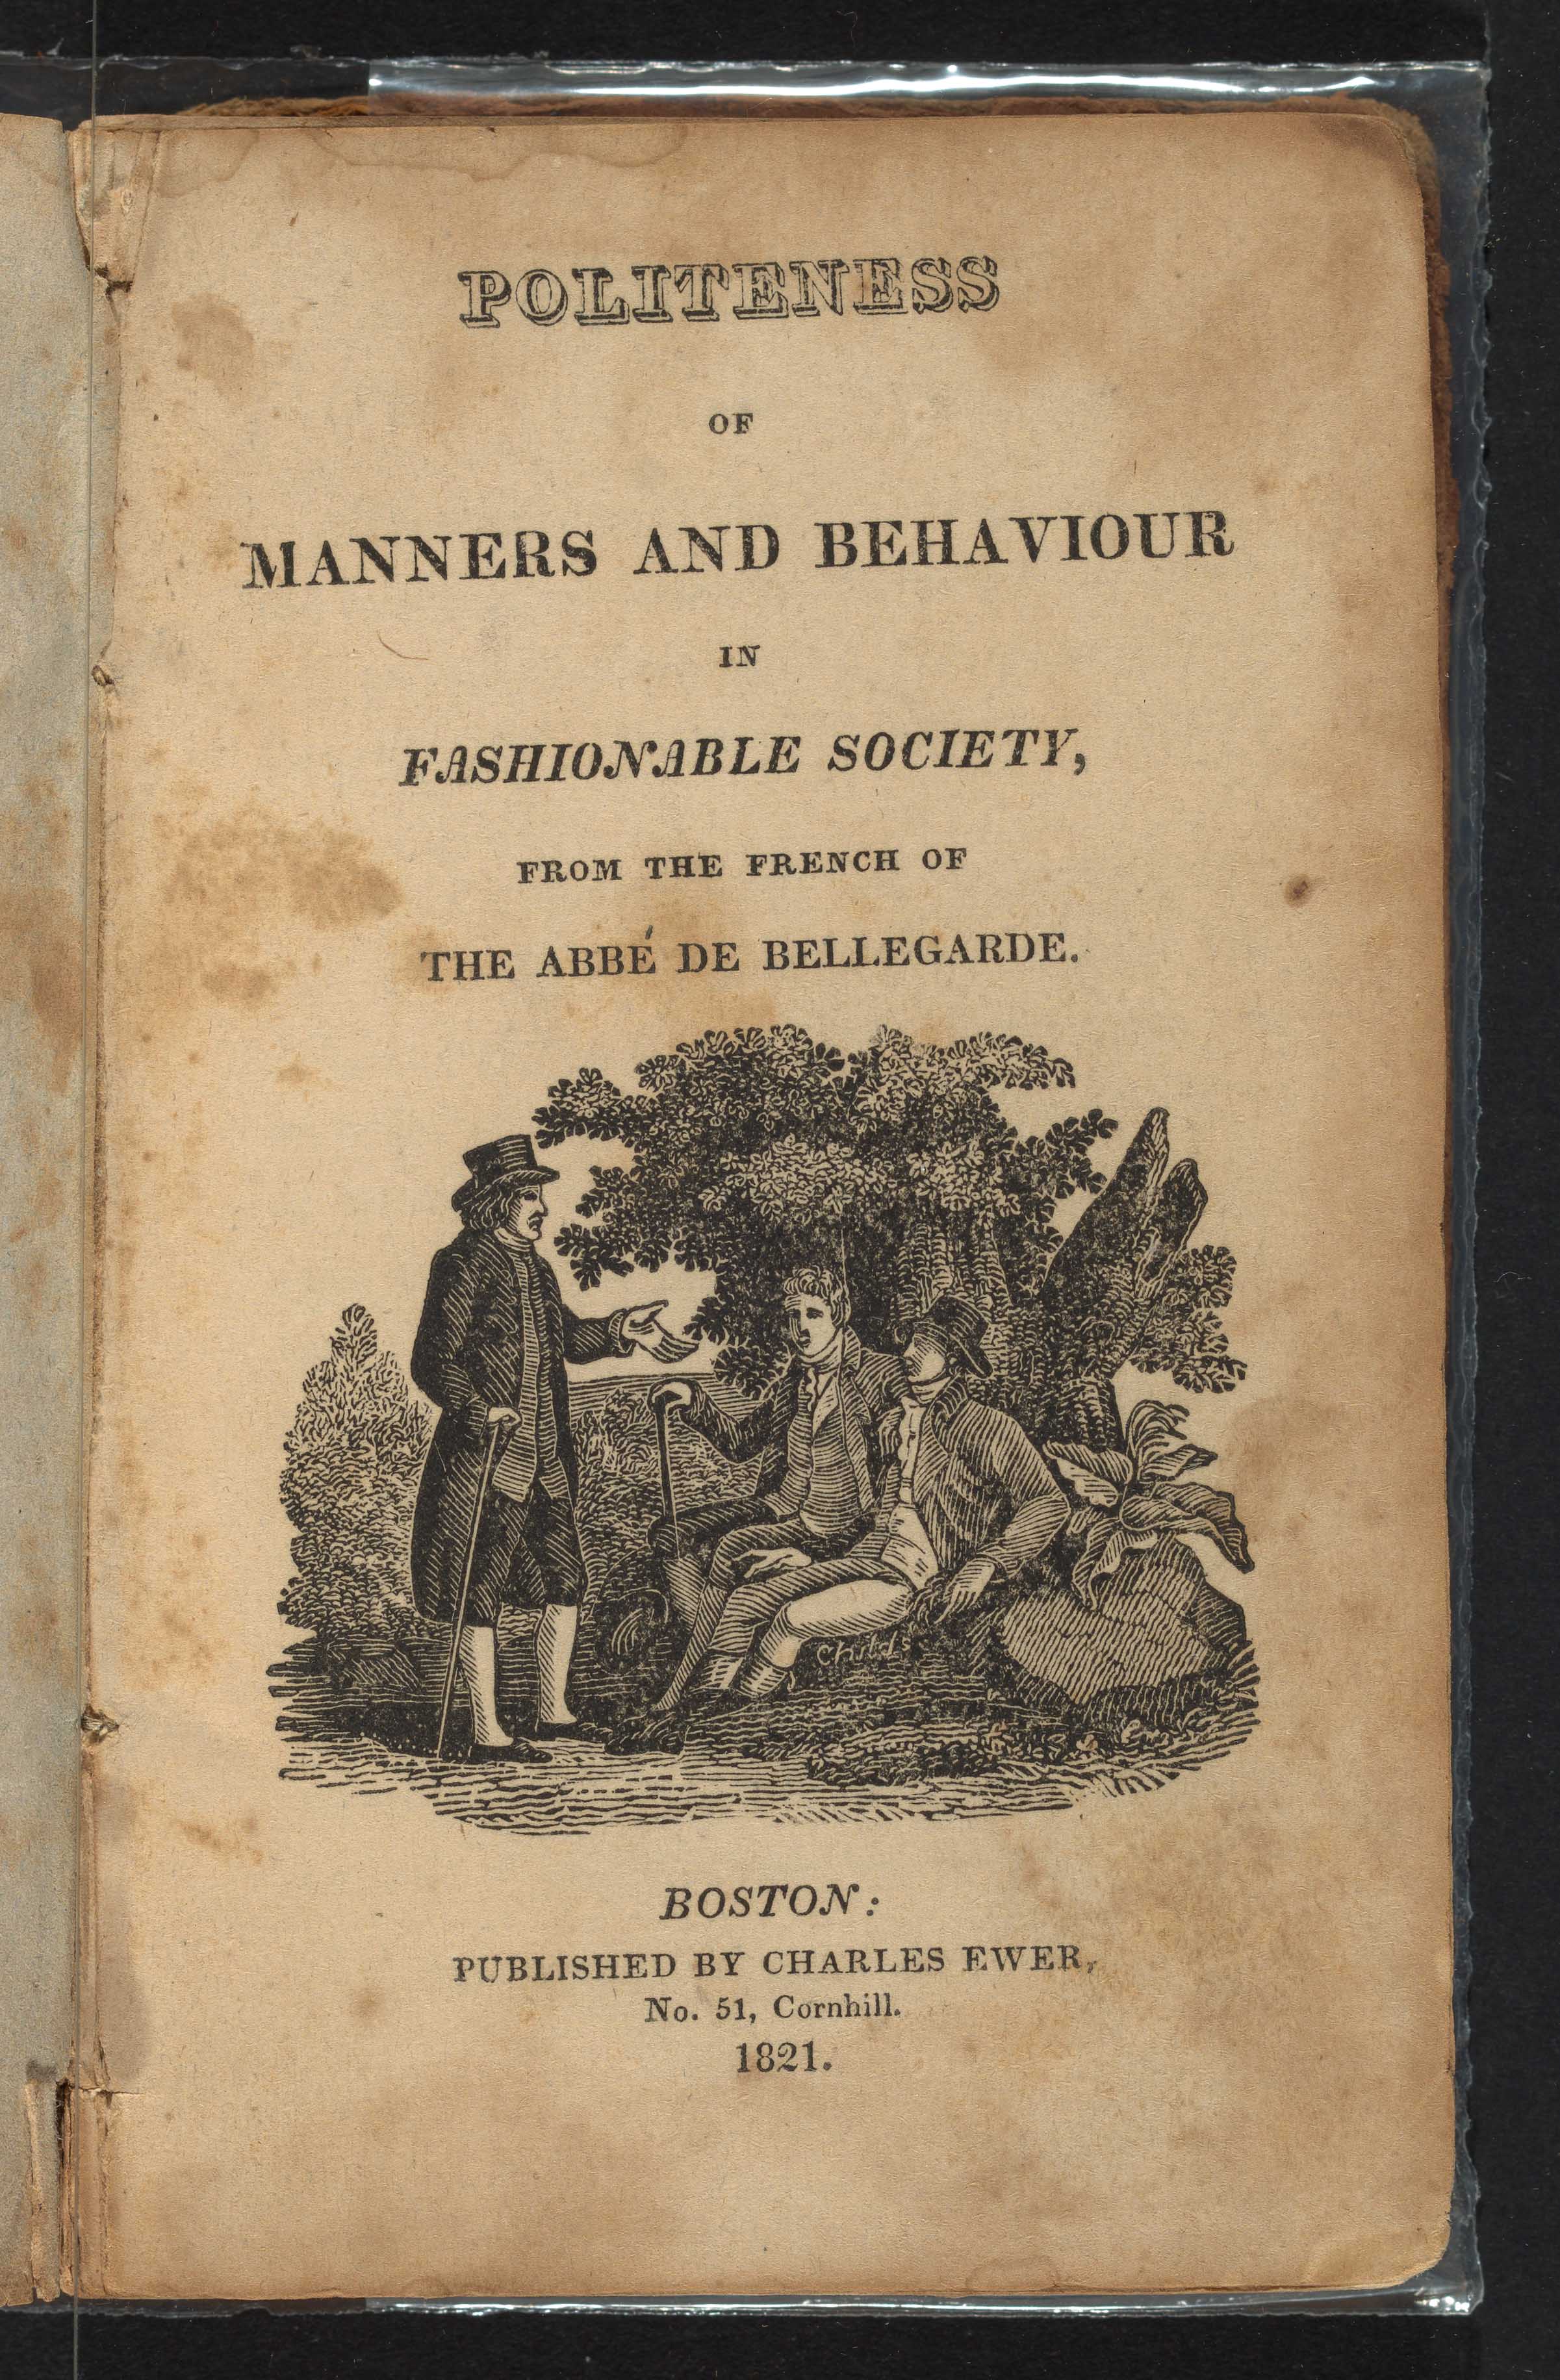 Politeness of Manners and Behaviour in Fashionable Society